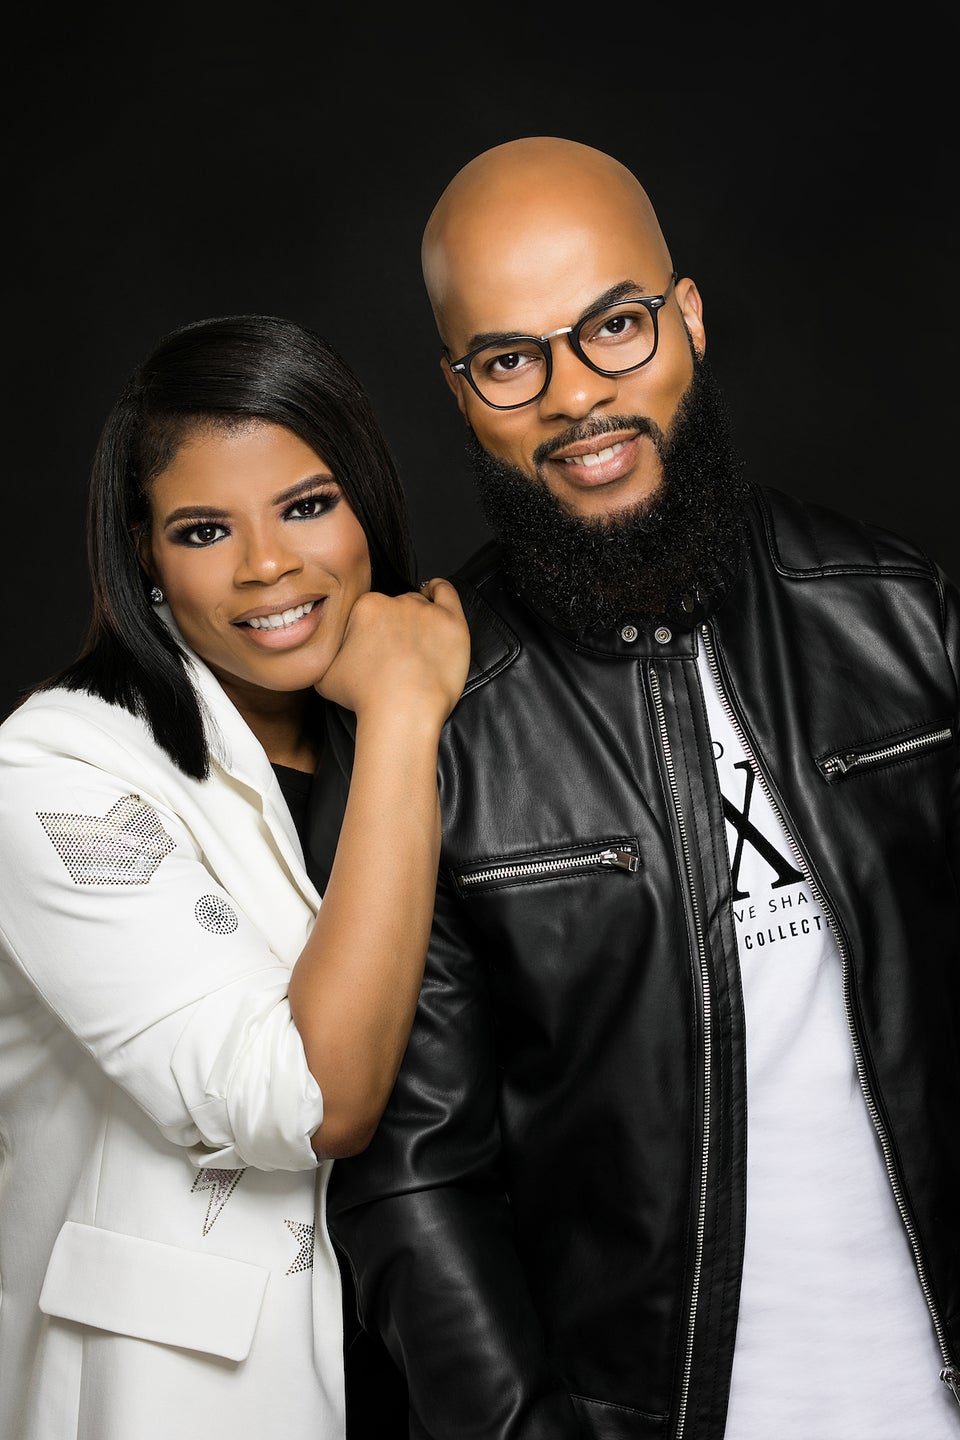 How Gospel Artist J.J. Hairston And Wife Trina Saved Their Marriage, Then Made It Stronger